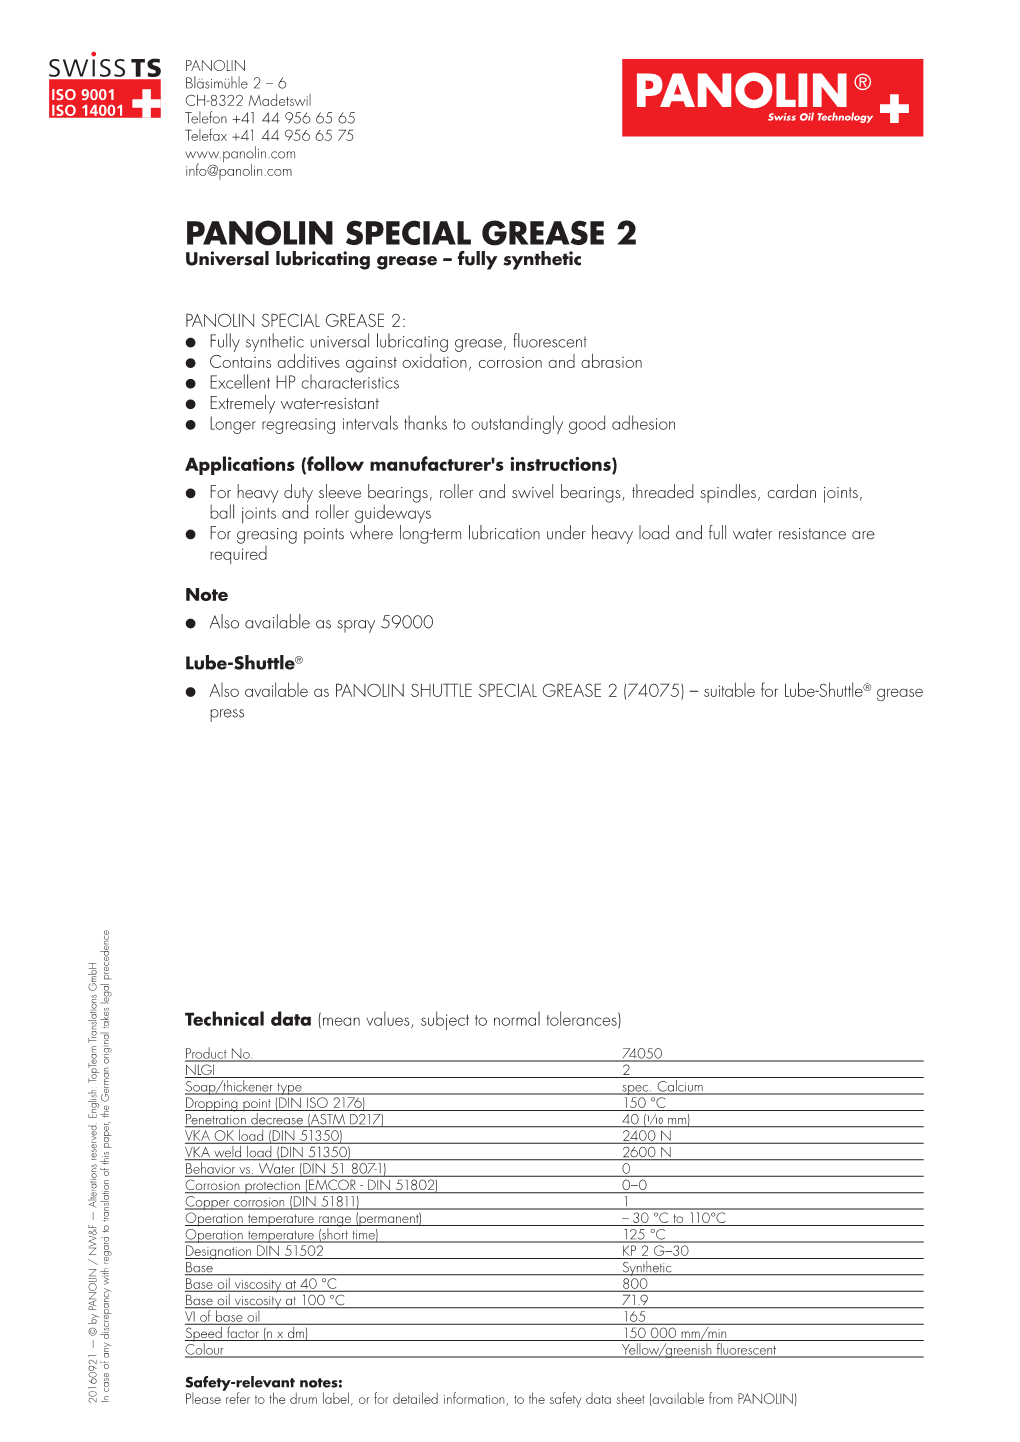 PANOLIN SPECIAL GREASE 2 Universal Lubricating Grease – Fully Synthetic